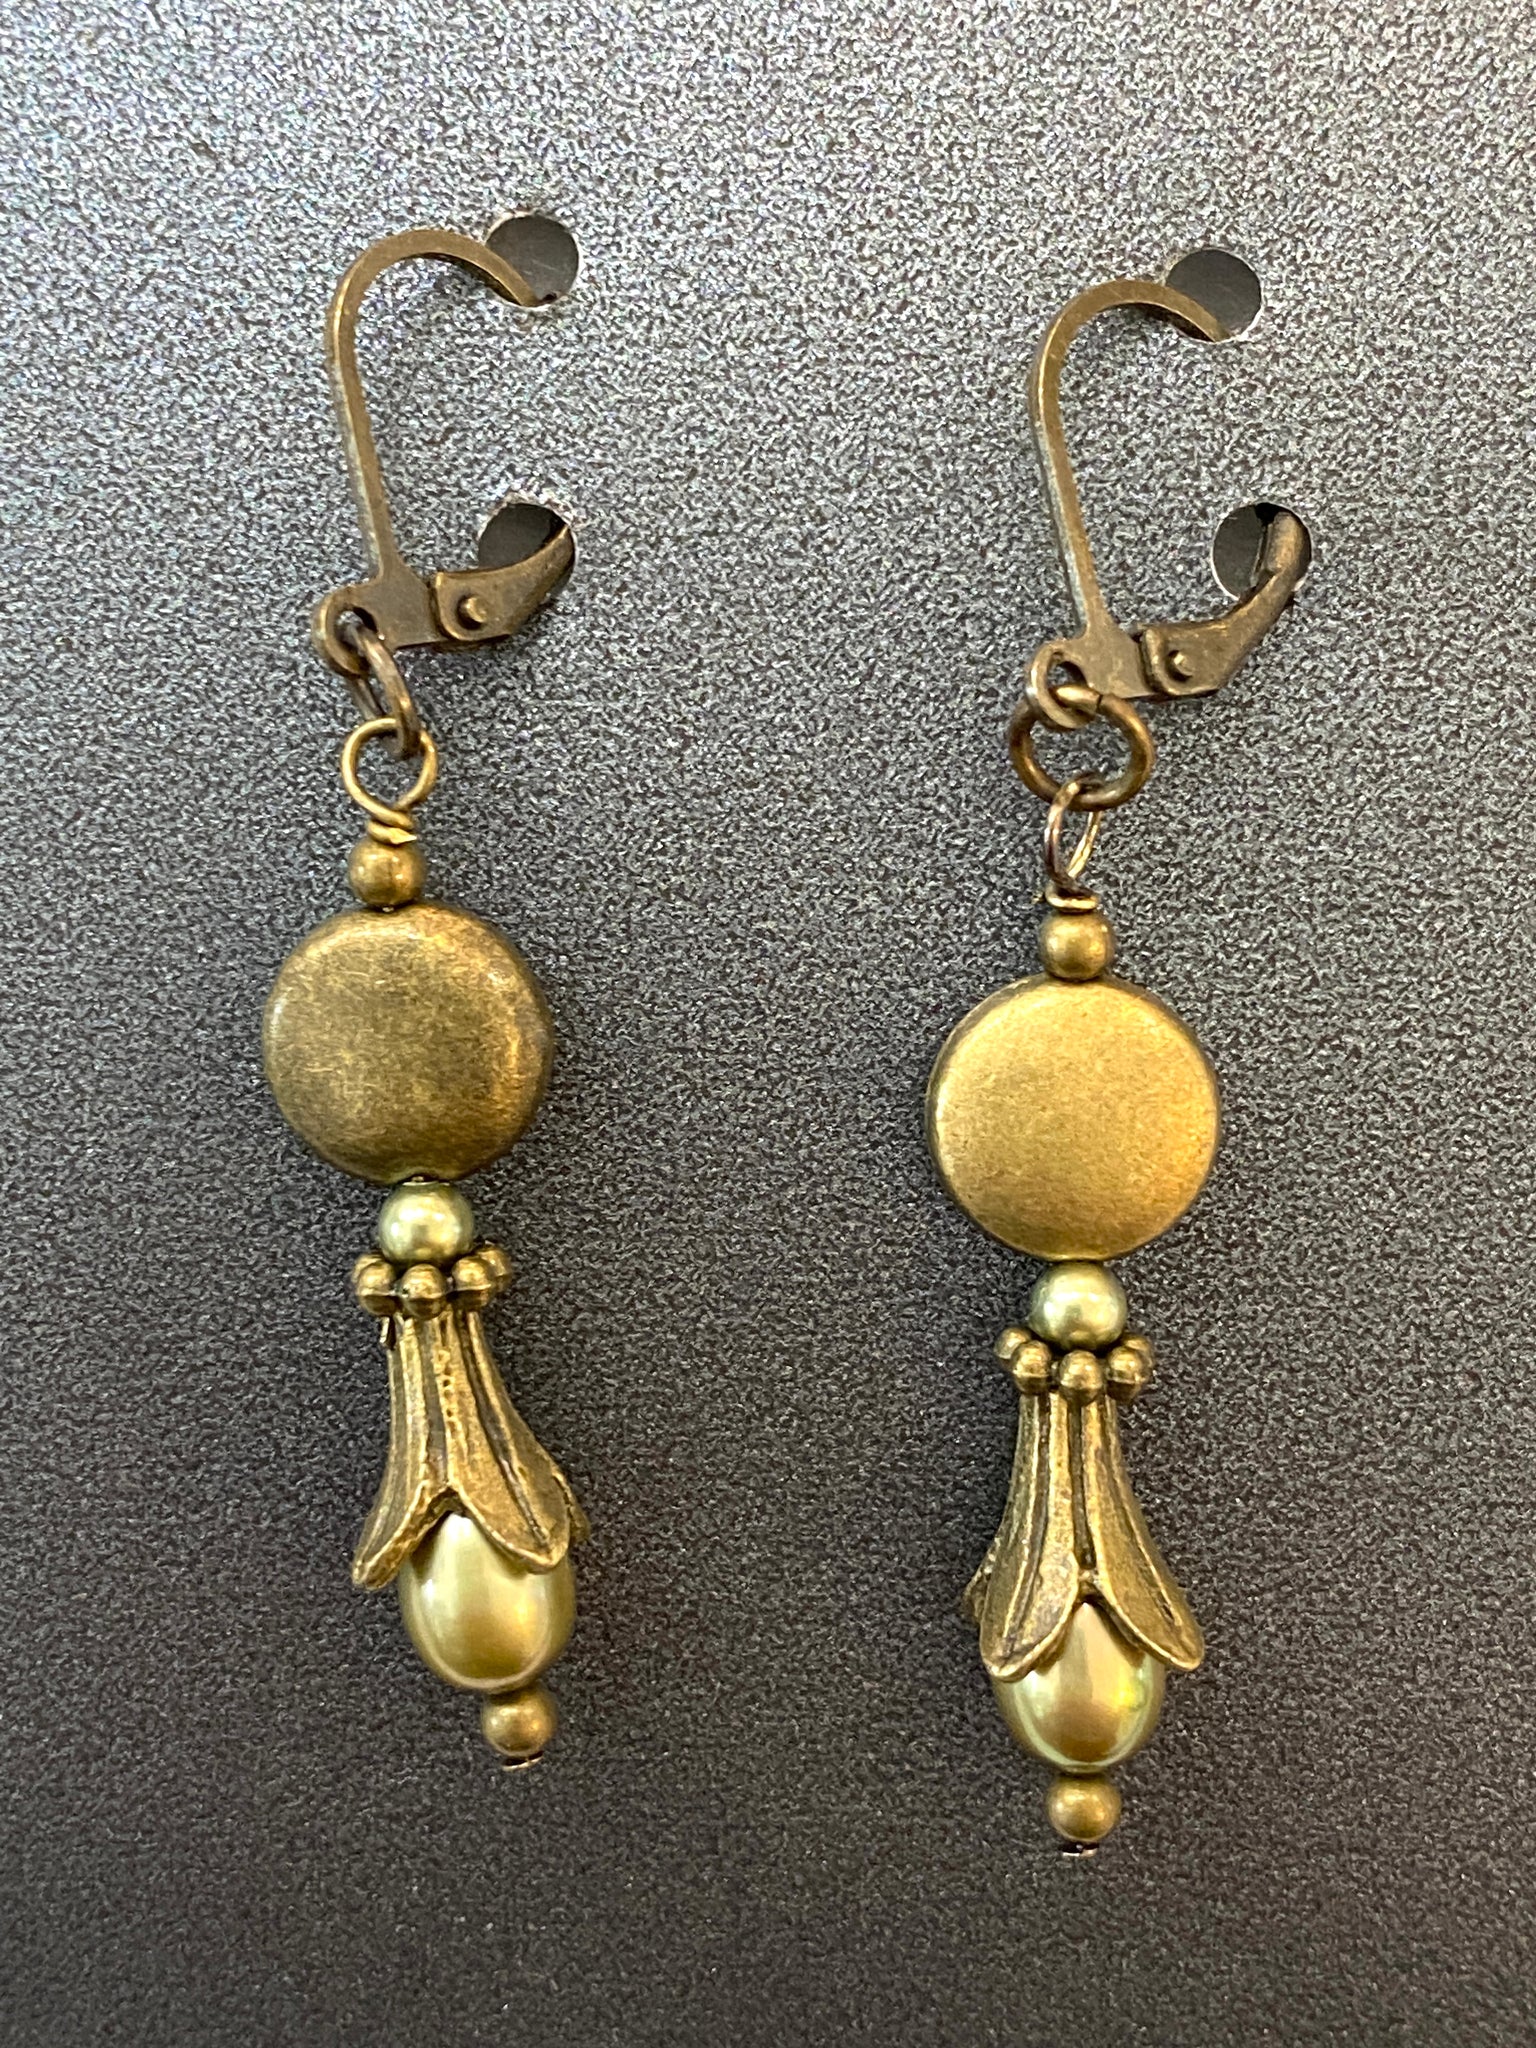 Green Pearl and Brass Beads Hand Wired Earrings Made in PDX